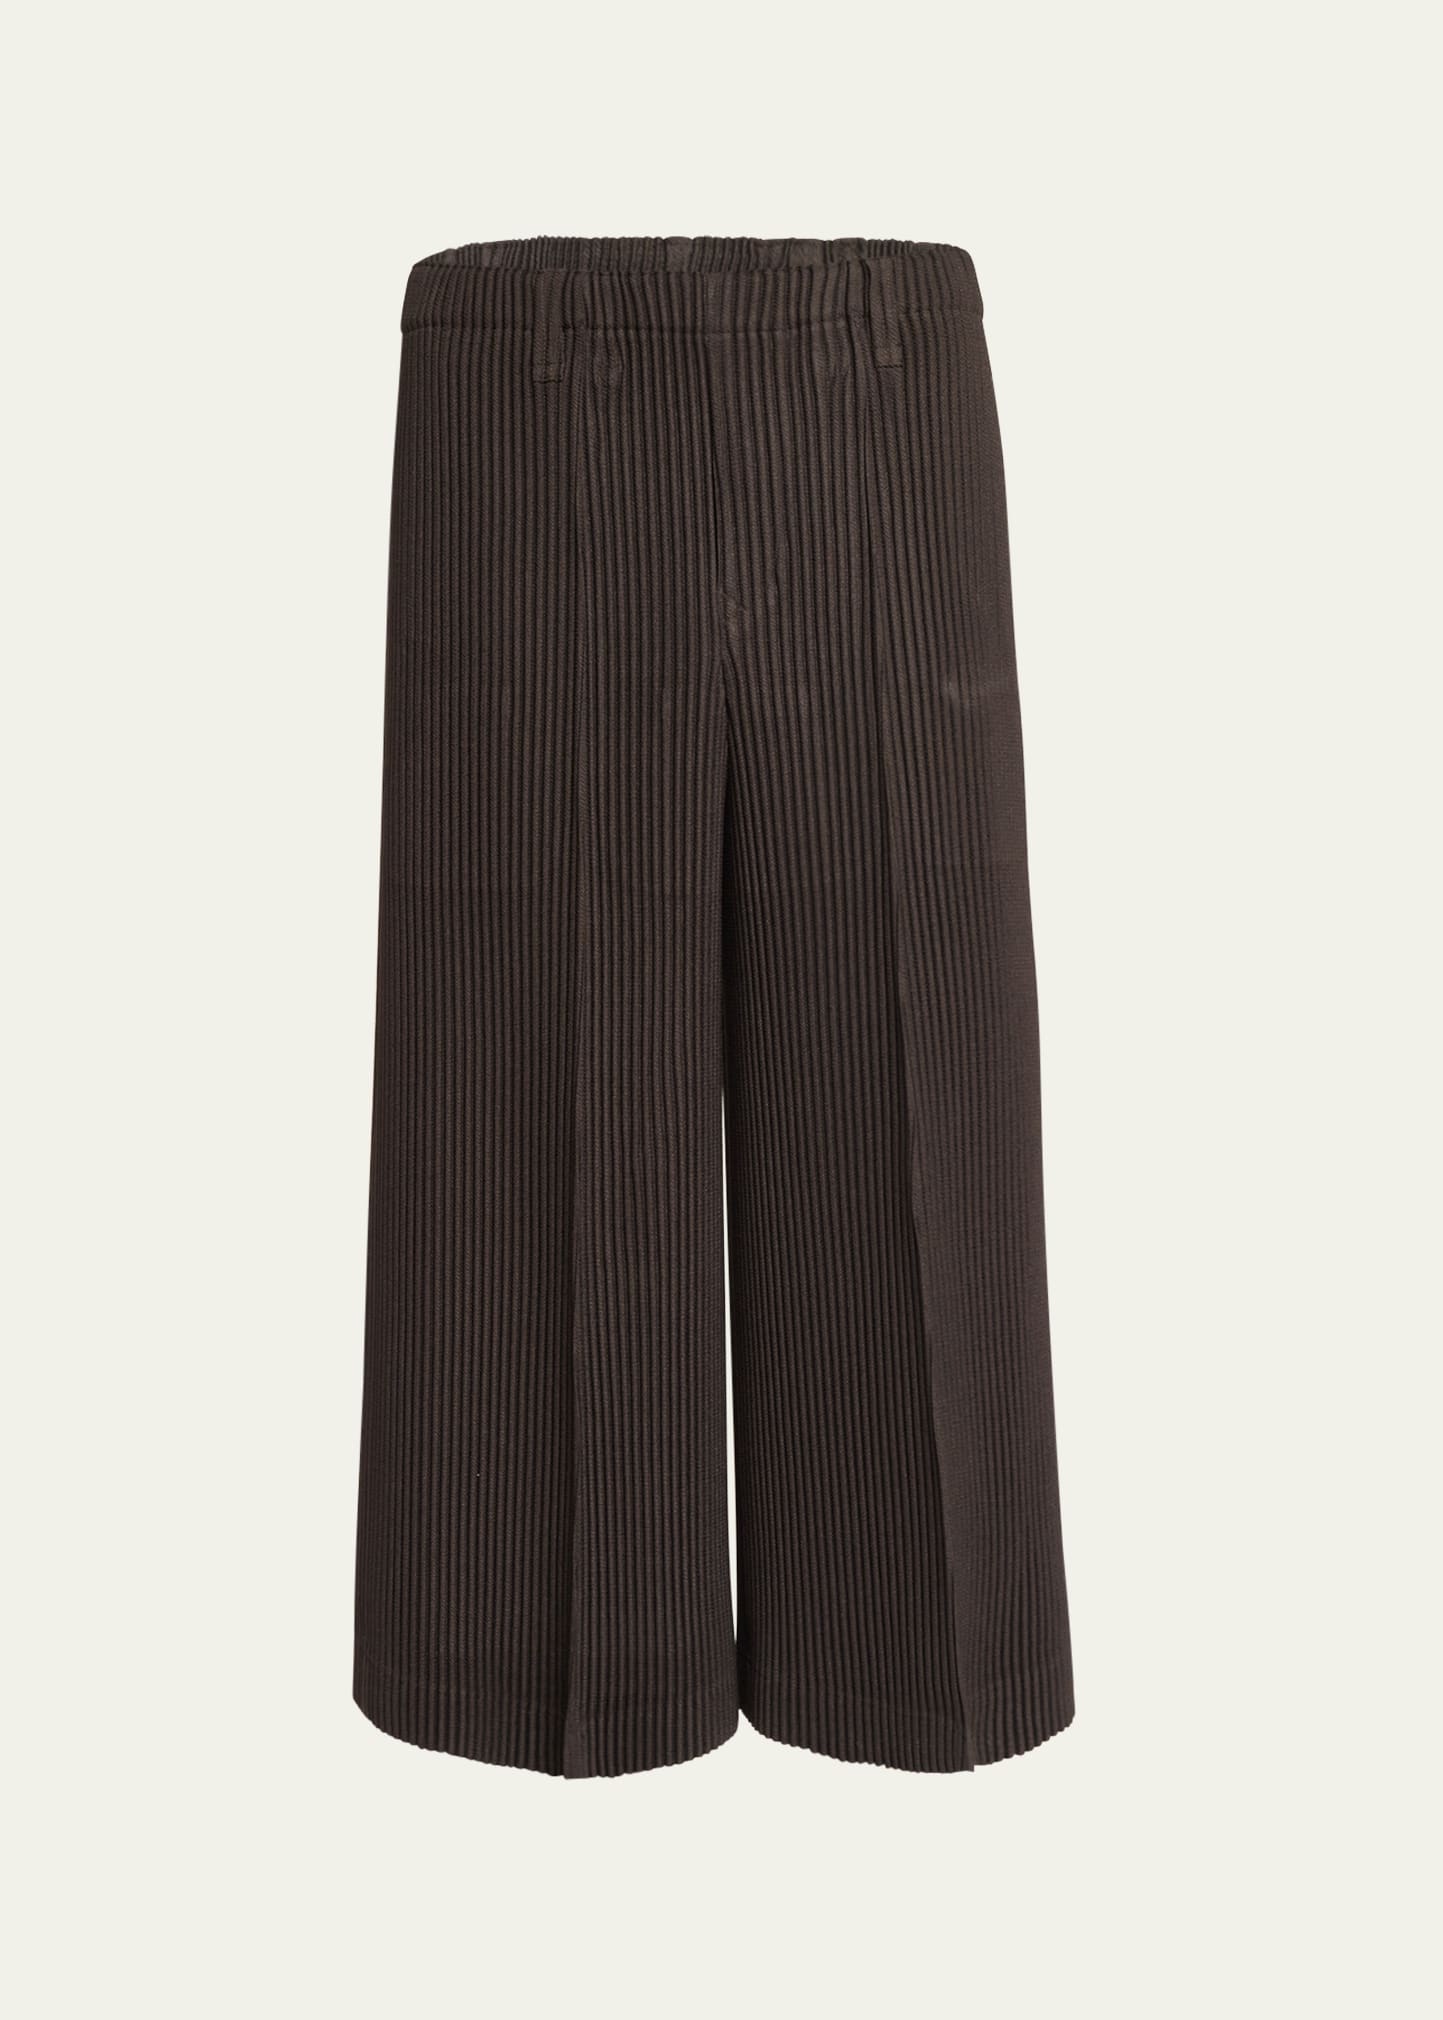 Issey Miyake Men's Pleated Polyester Cropped Pants In Brown